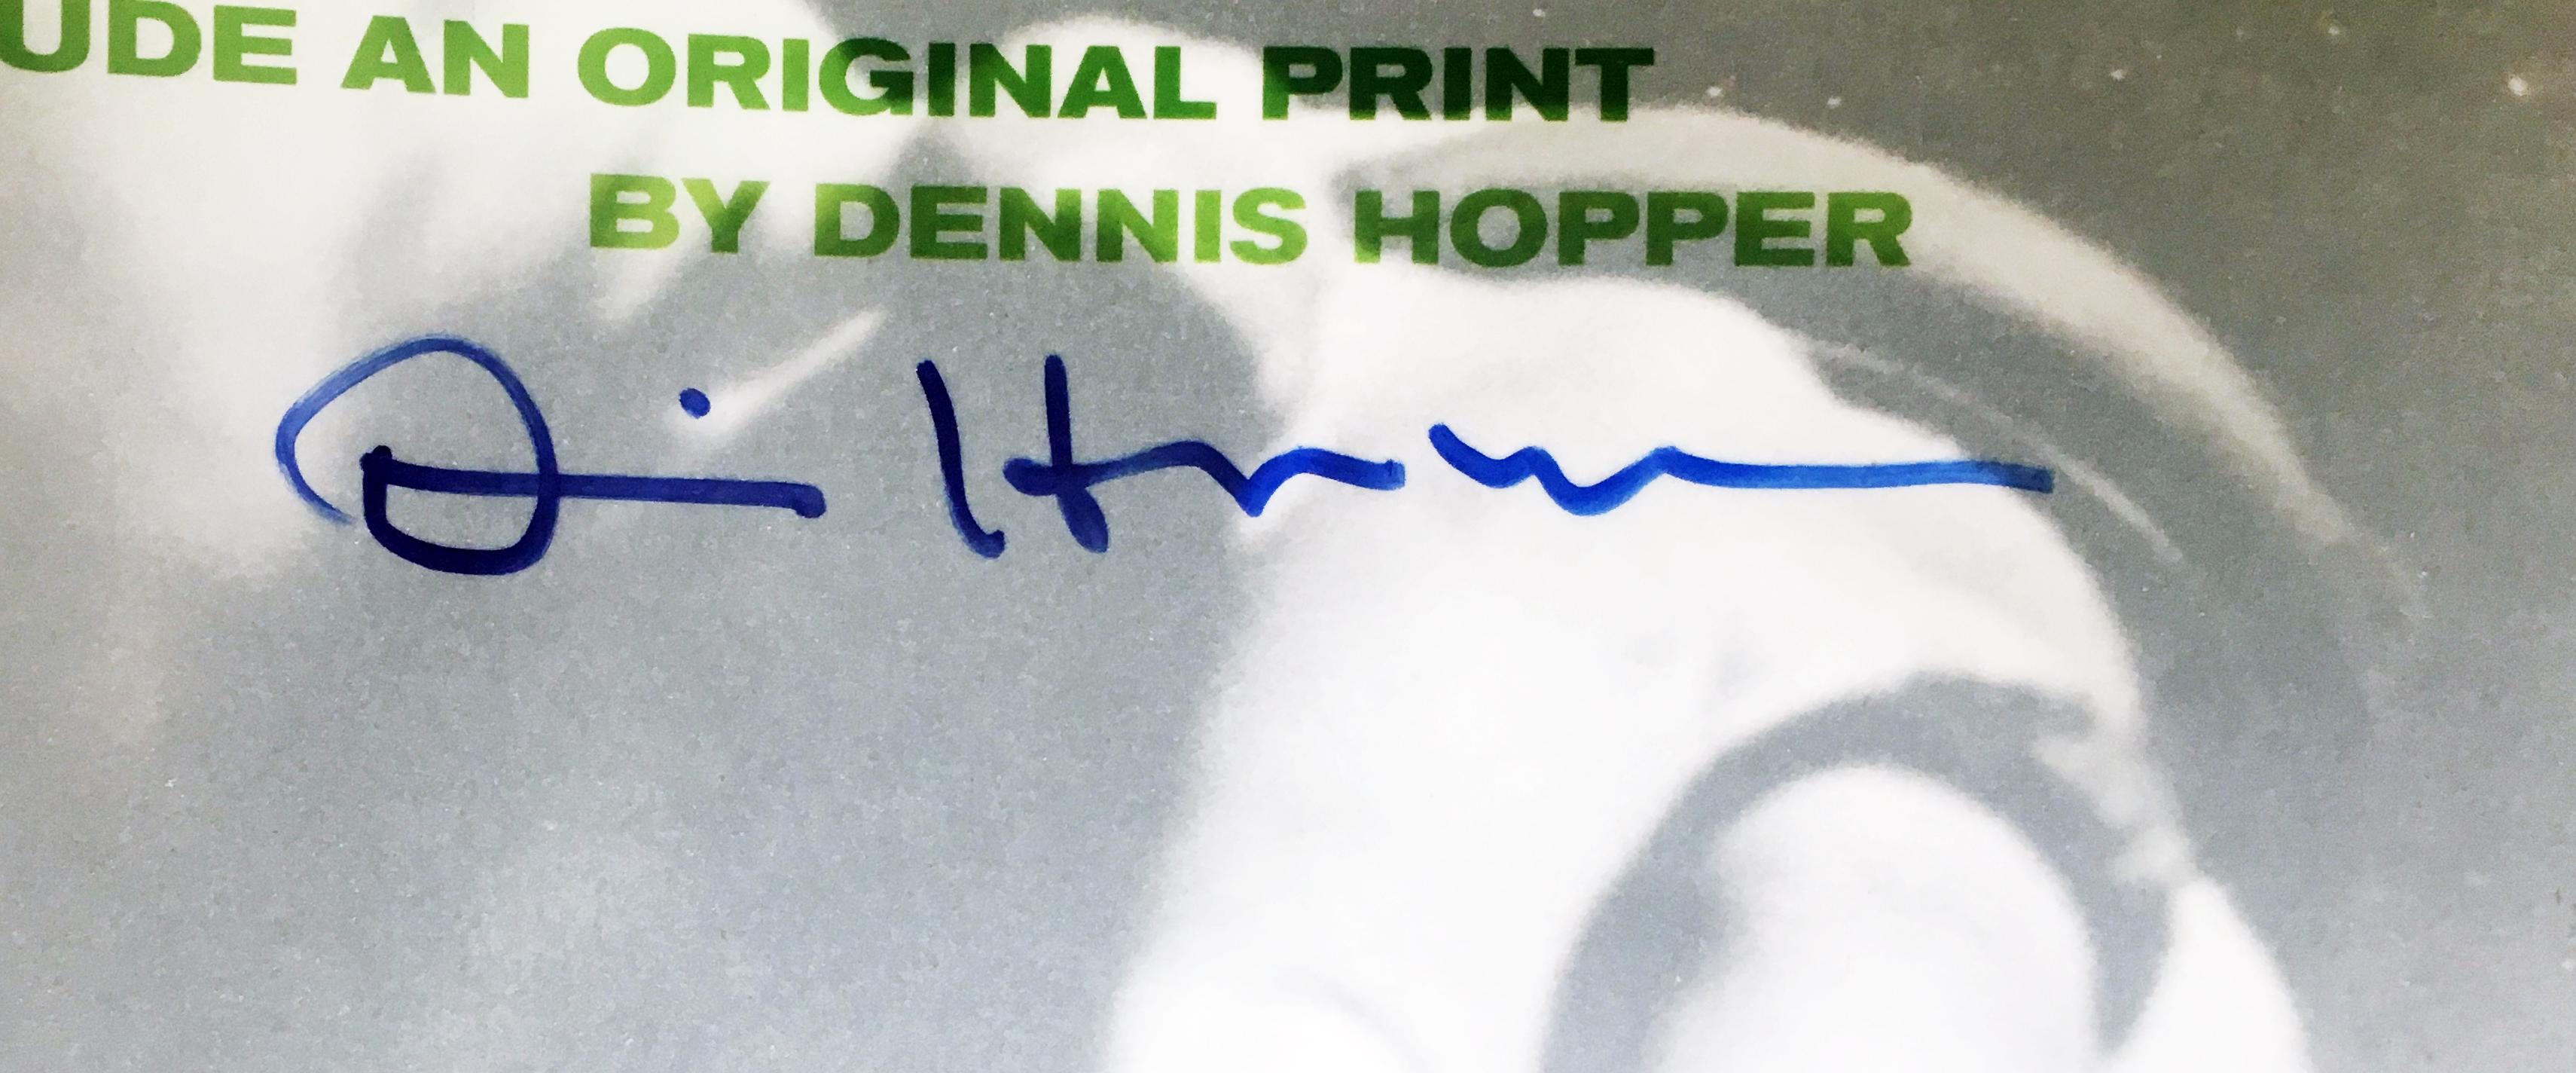 Dennis Hopper Photographs 1961 - 1967 (Limited Edition Hand Signed), 2009
Hardcover Book in Clamshell Box. Hand Signed and numbered 1327/1500
Hand signed by Dennis Hopper on the colophon page.
19 × 14 1/4 × 3 1/10 inches
This is the limited edition